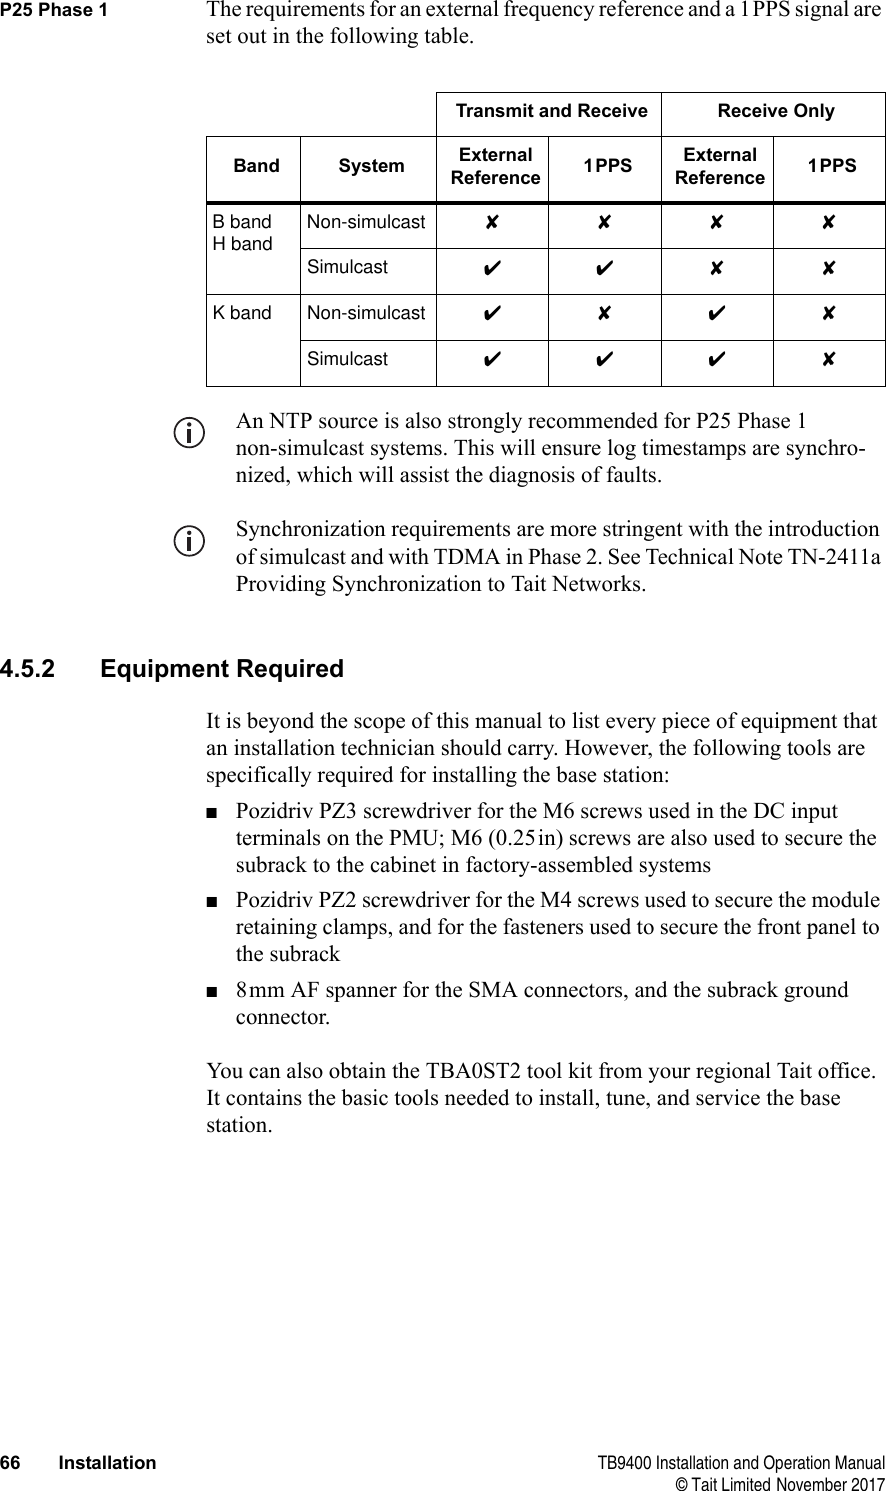  66 Installation TB9400 Installation and Operation Manual© Tait Limited November 2017P25 Phase 1 The requirements for an external frequency reference and a 1PPS signal are set out in the following table. An NTP source is also strongly recommended for P25 Phase 1 non-simulcast systems. This will ensure log timestamps are synchro-nized, which will assist the diagnosis of faults.Synchronization requirements are more stringent with the introduction of simulcast and with TDMA in Phase 2. See Technical Note TN-2411a Providing Synchronization to Tait Networks.4.5.2 Equipment RequiredIt is beyond the scope of this manual to list every piece of equipment that an installation technician should carry. However, the following tools are specifically required for installing the base station:■Pozidriv PZ3 screwdriver for the M6 screws used in the DC input terminals on the PMU; M6 (0.25in) screws are also used to secure the subrack to the cabinet in factory-assembled systems■Pozidriv PZ2 screwdriver for the M4 screws used to secure the module retaining clamps, and for the fasteners used to secure the front panel to the subrack■8mm AF spanner for the SMA connectors, and the subrack ground connector.You can also obtain the TBA0ST2 tool kit from your regional Tait office. It contains the basic tools needed to install, tune, and service the base station.Transmit and Receive Receive OnlyBand System External Reference 1PPS External Reference 1PPSB bandH bandNon-simulcast ✘✘✘✘Simulcast ✔✔✘ ✘K band Non-simulcast ✔✘✔✘Simulcast ✔✔✔✘